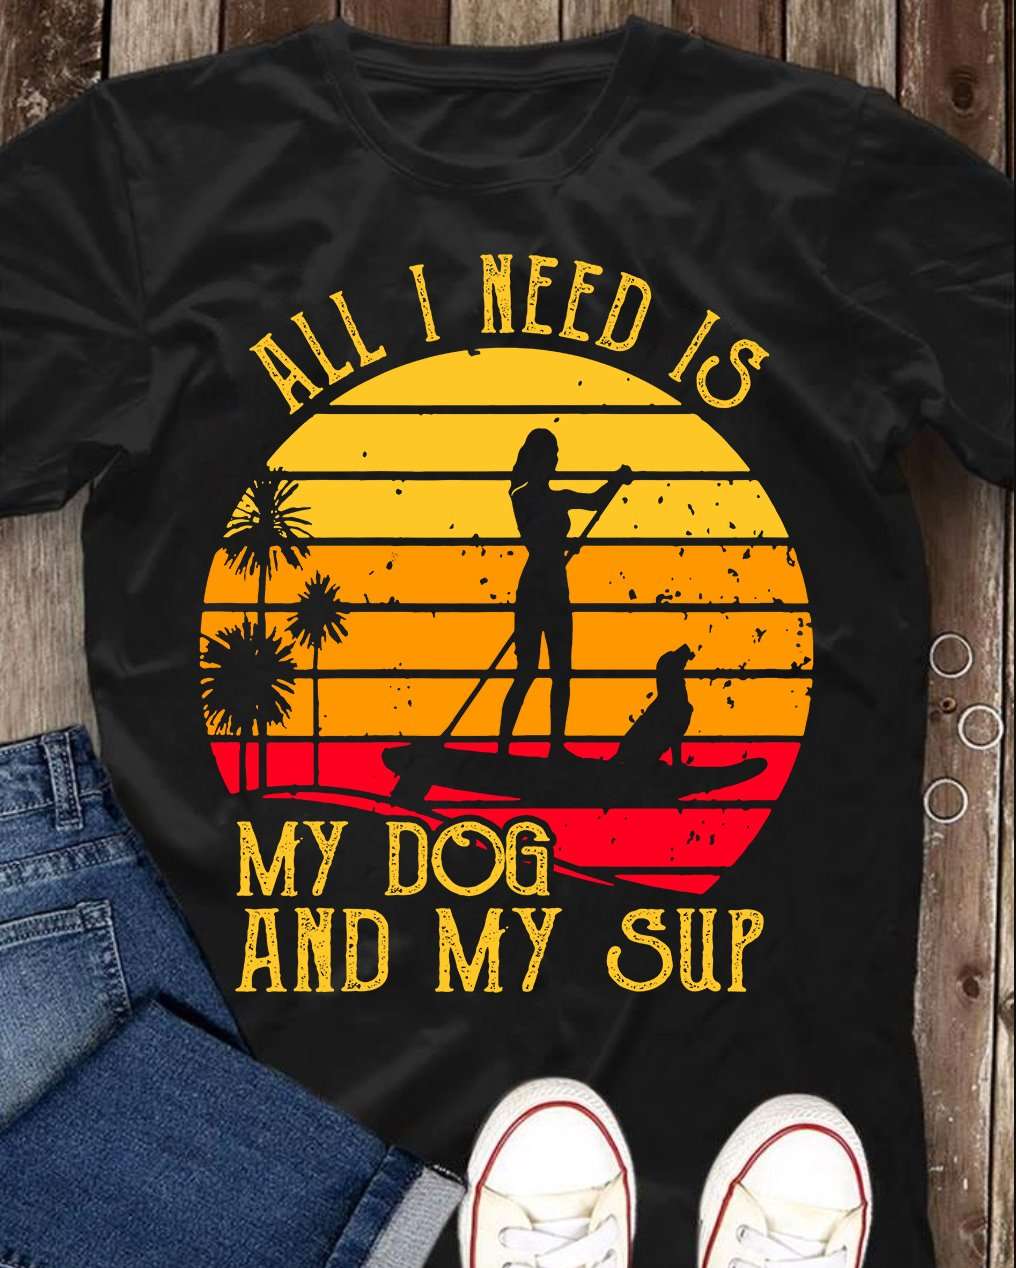 All I need is my dog and my sup - Love surfing wave woman, dog and sup